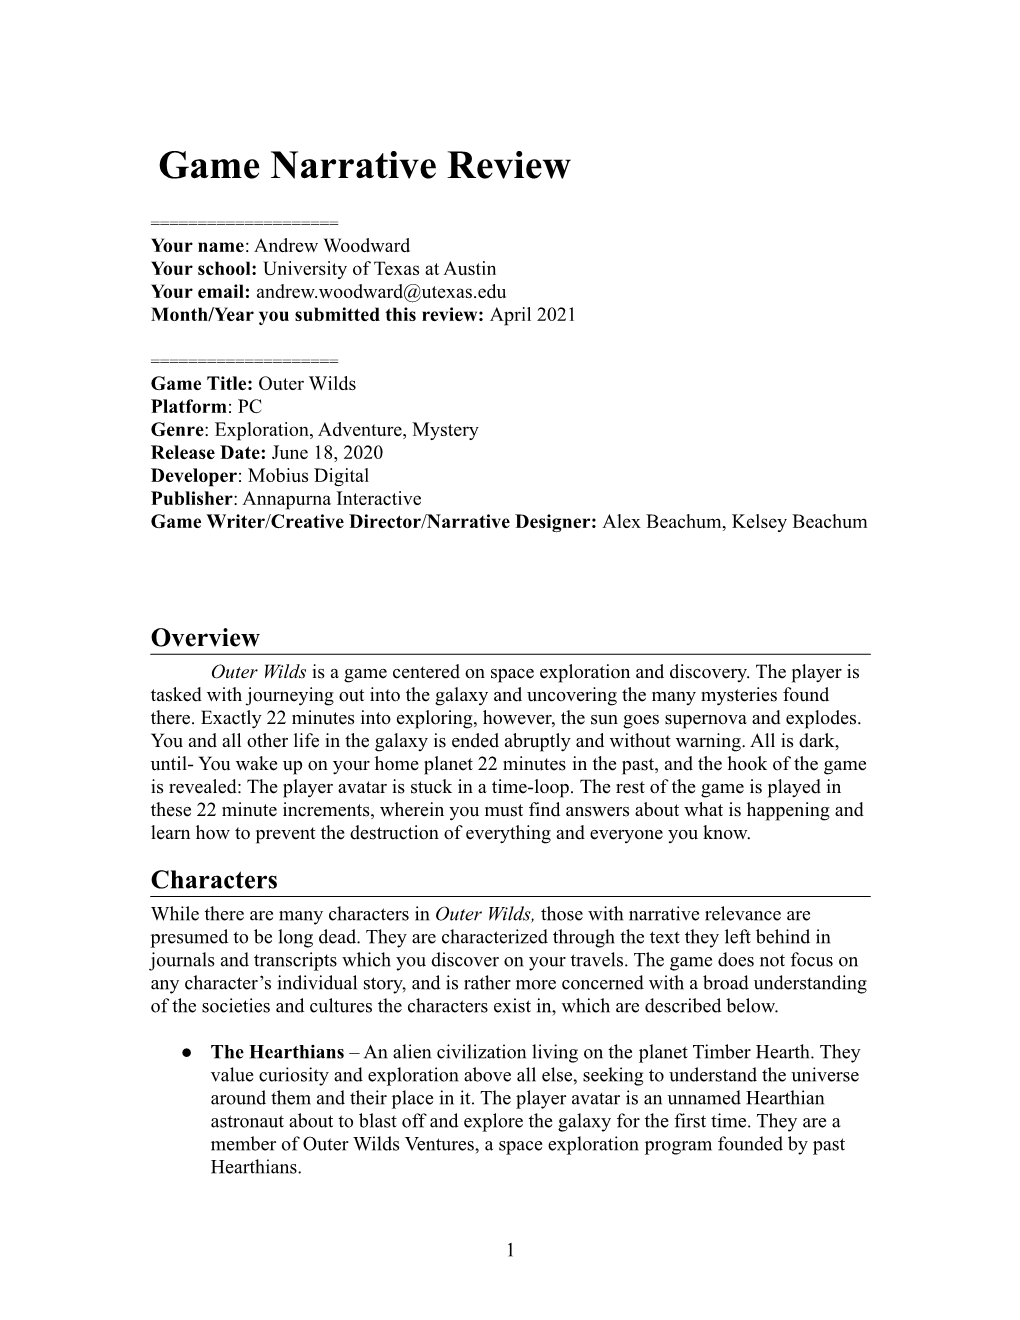 Andrewwoodward Game Narrative Review Outerwilds.Docx